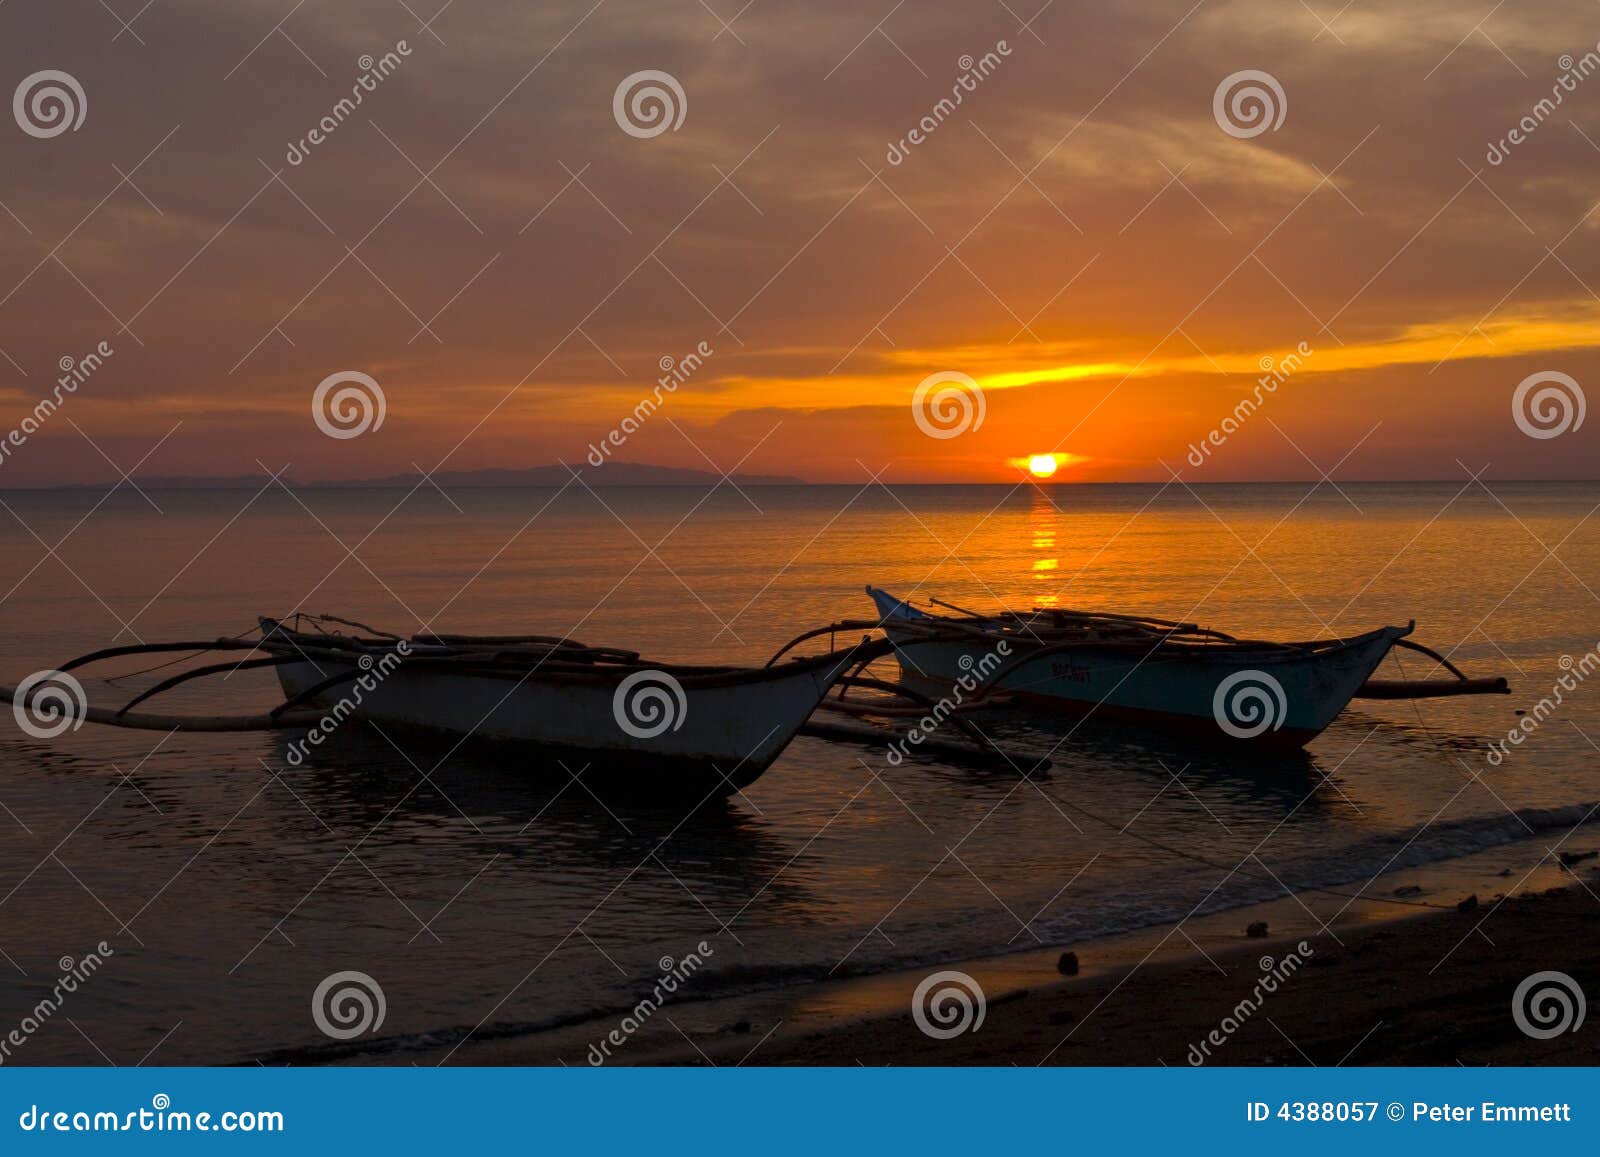 two banca boats at sunset on beach